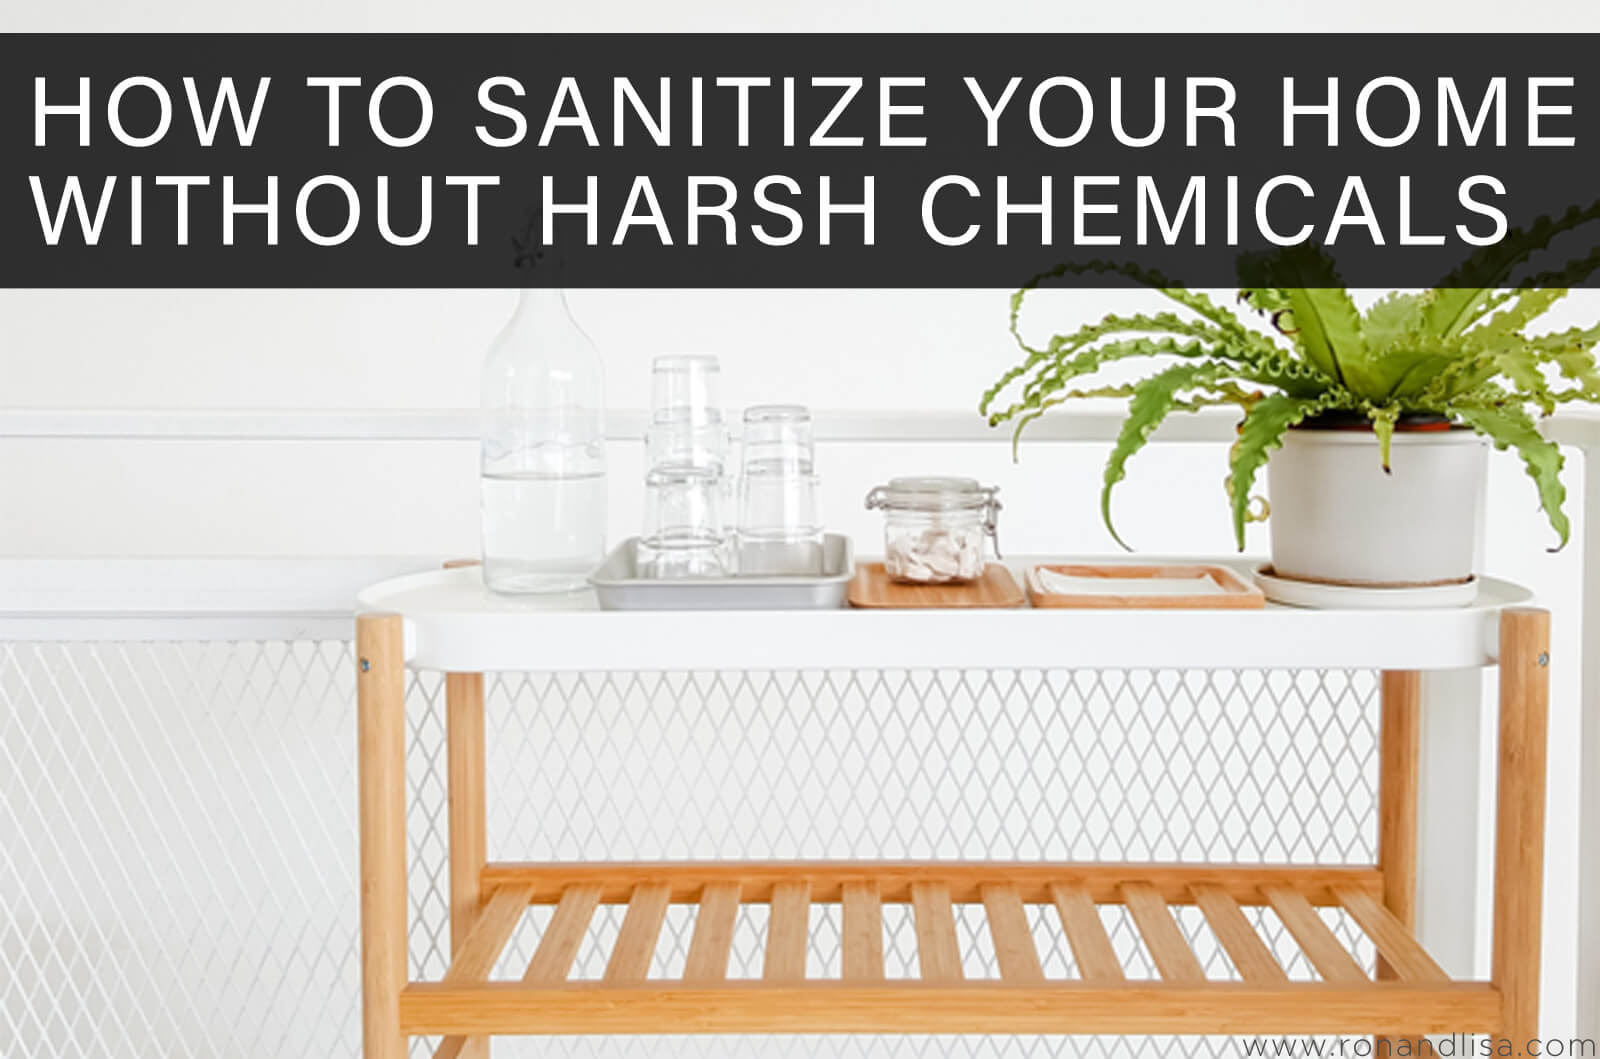 How To Sanitize Your Home Without Harsh Chemicals